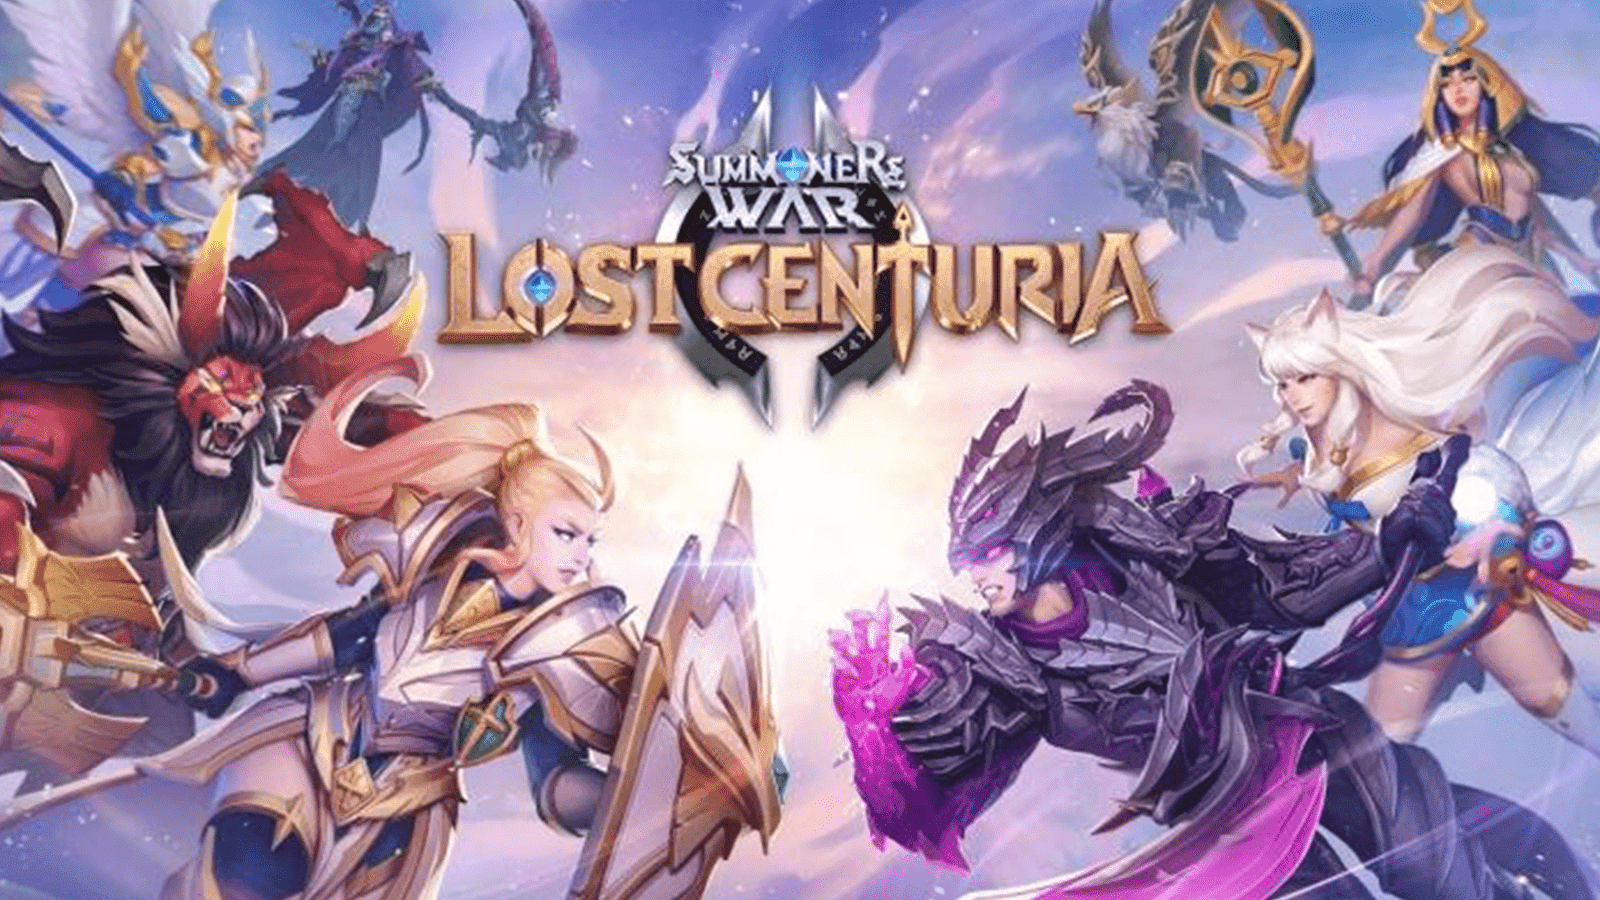 Summoners War: Lost Centuria - Game Review - Play Games